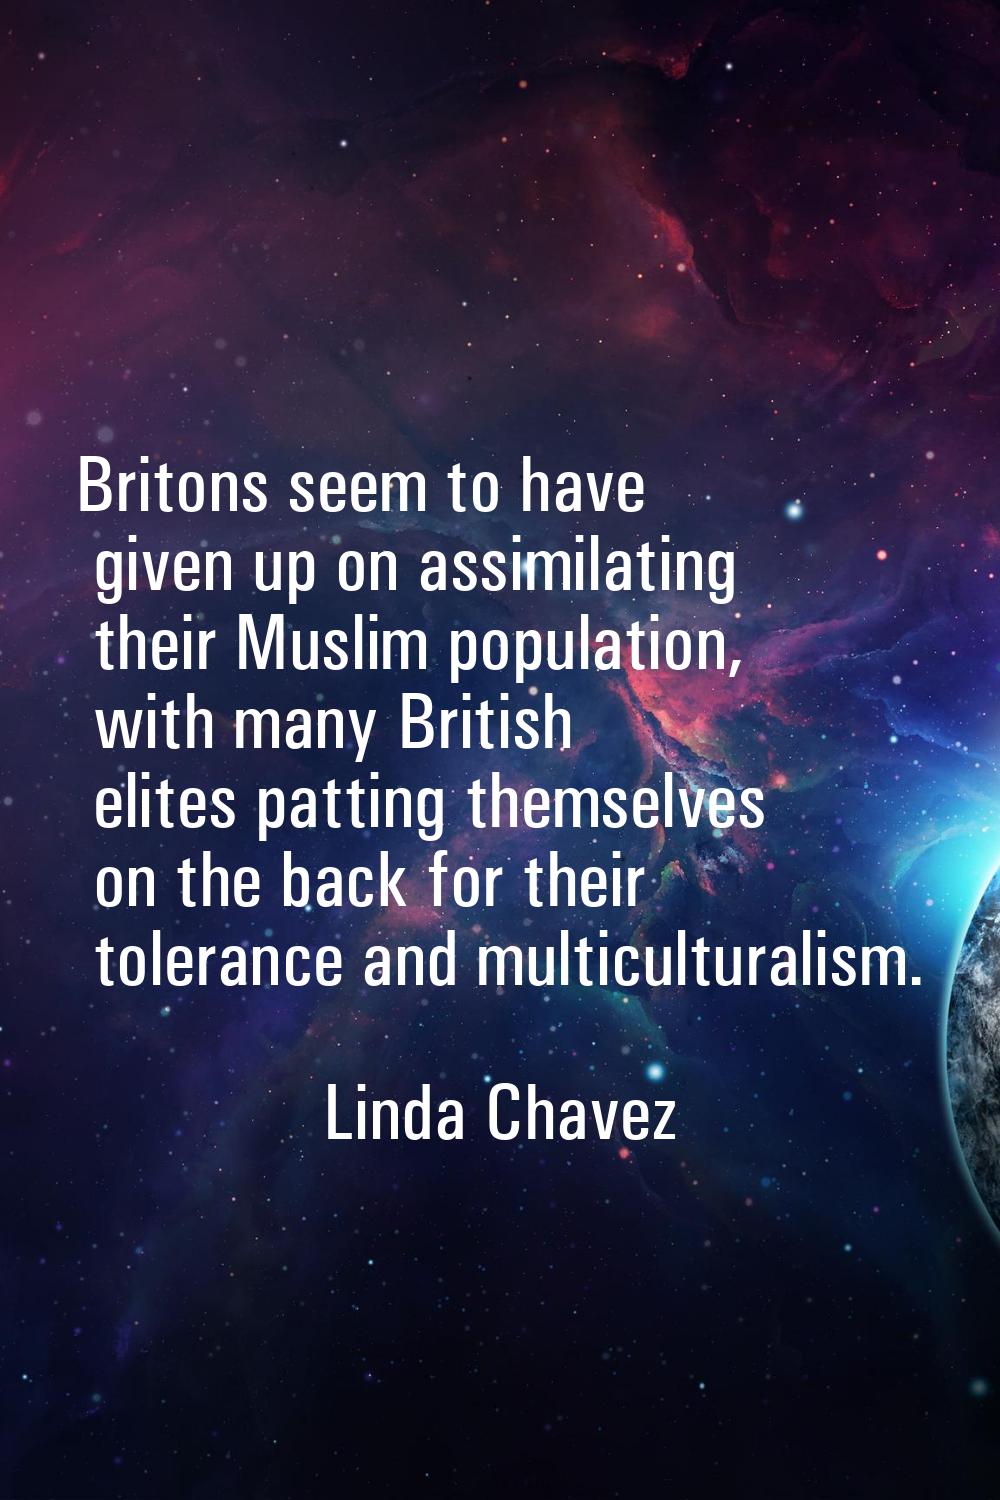 Britons seem to have given up on assimilating their Muslim population, with many British elites pat